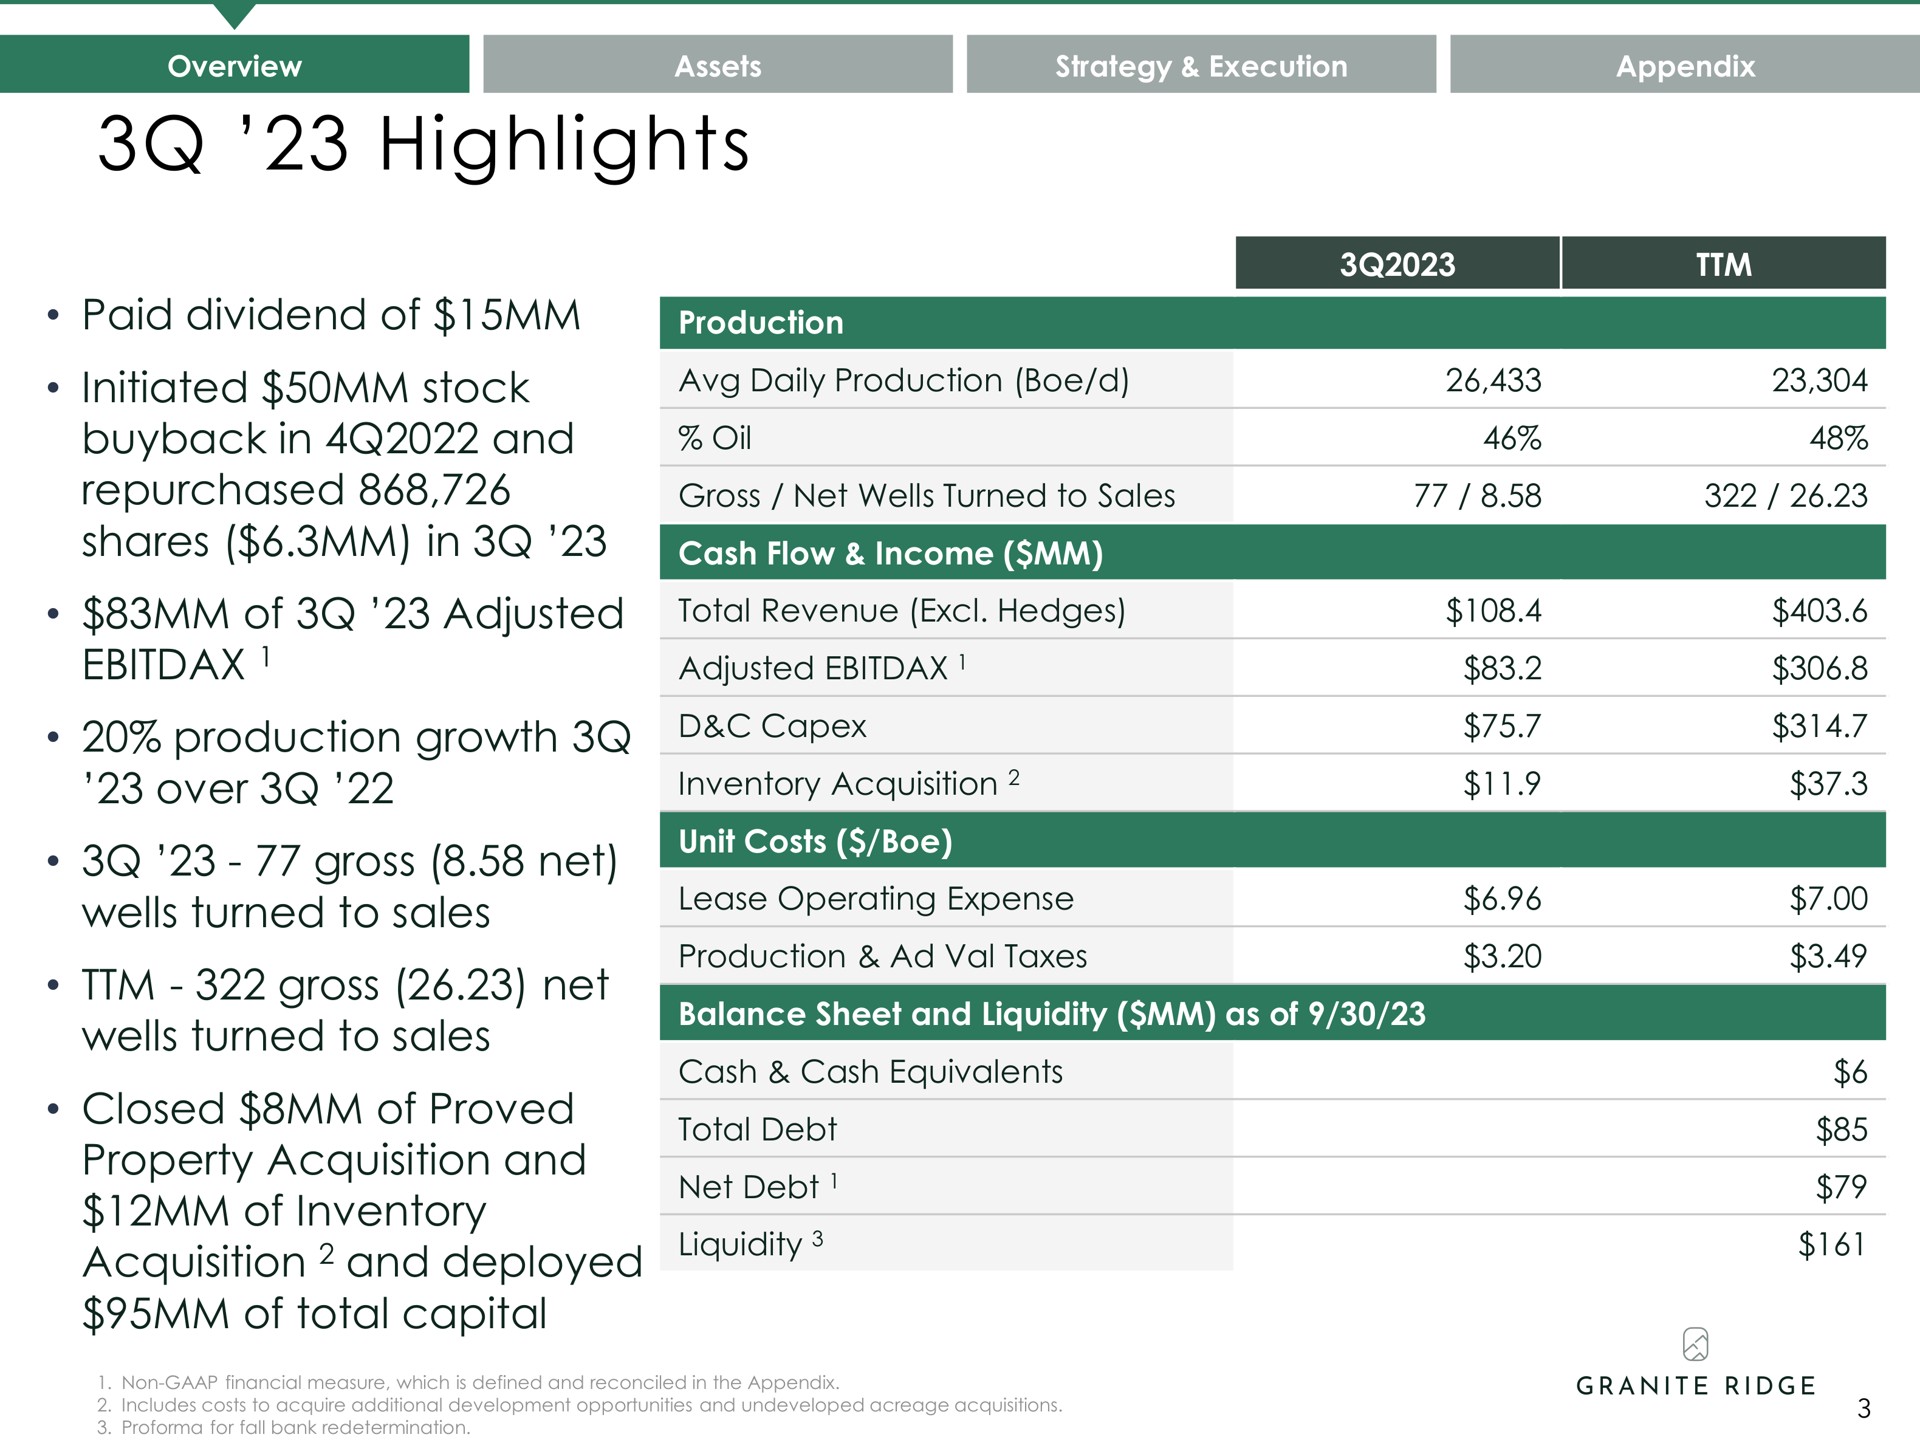 highlights asses strategy a execution appendix paid dividend of shares in | Granite Ridge